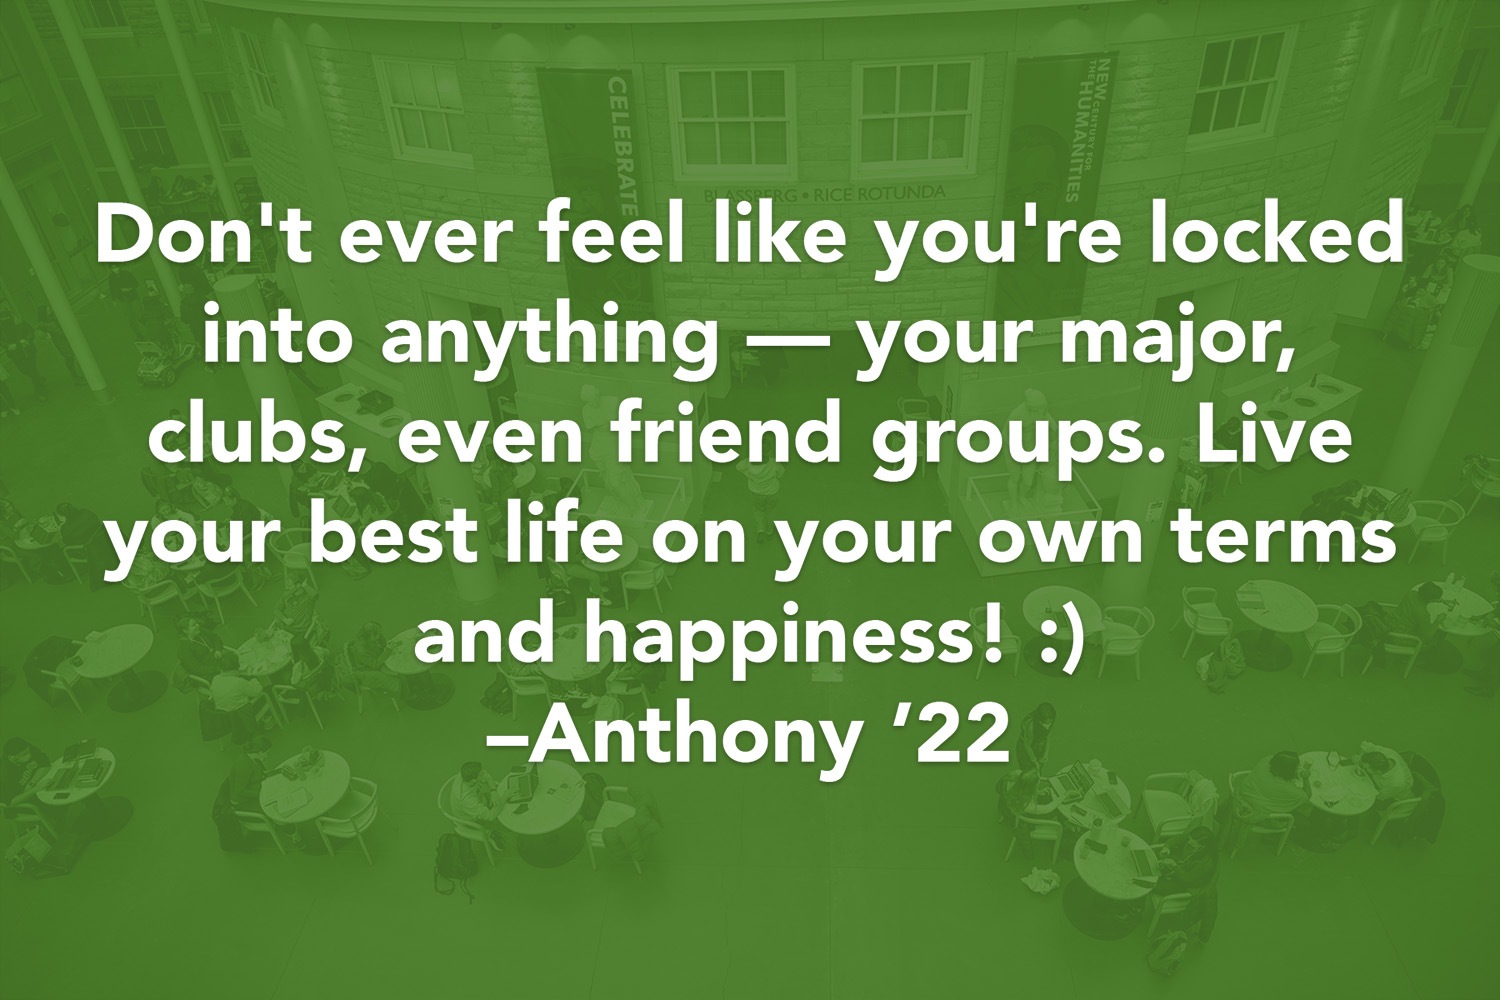 Quote: Don't ever feel like you're locked into anything - your major, clubs, even friend groups. Live your best life on your own terms and happiness! :) -Anthony '22